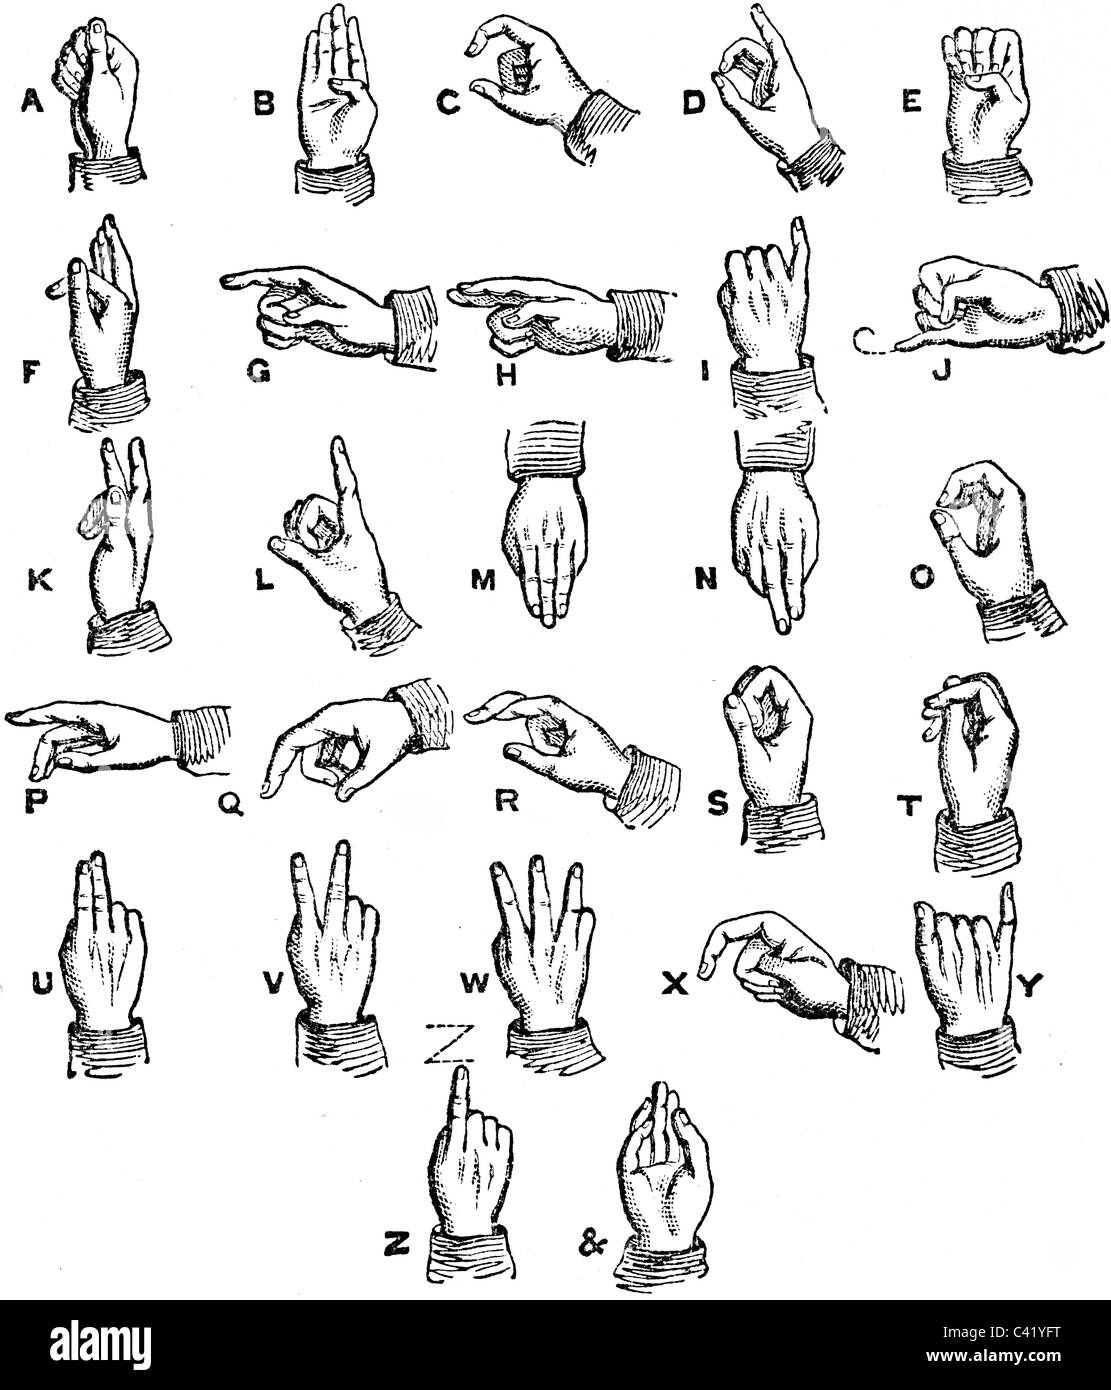 19th Century book illustration, taken from 9th edition (1875) of Encyclopaedia Britannica, of Deaf Dumb Single - Handed Alphabet Stock Photo